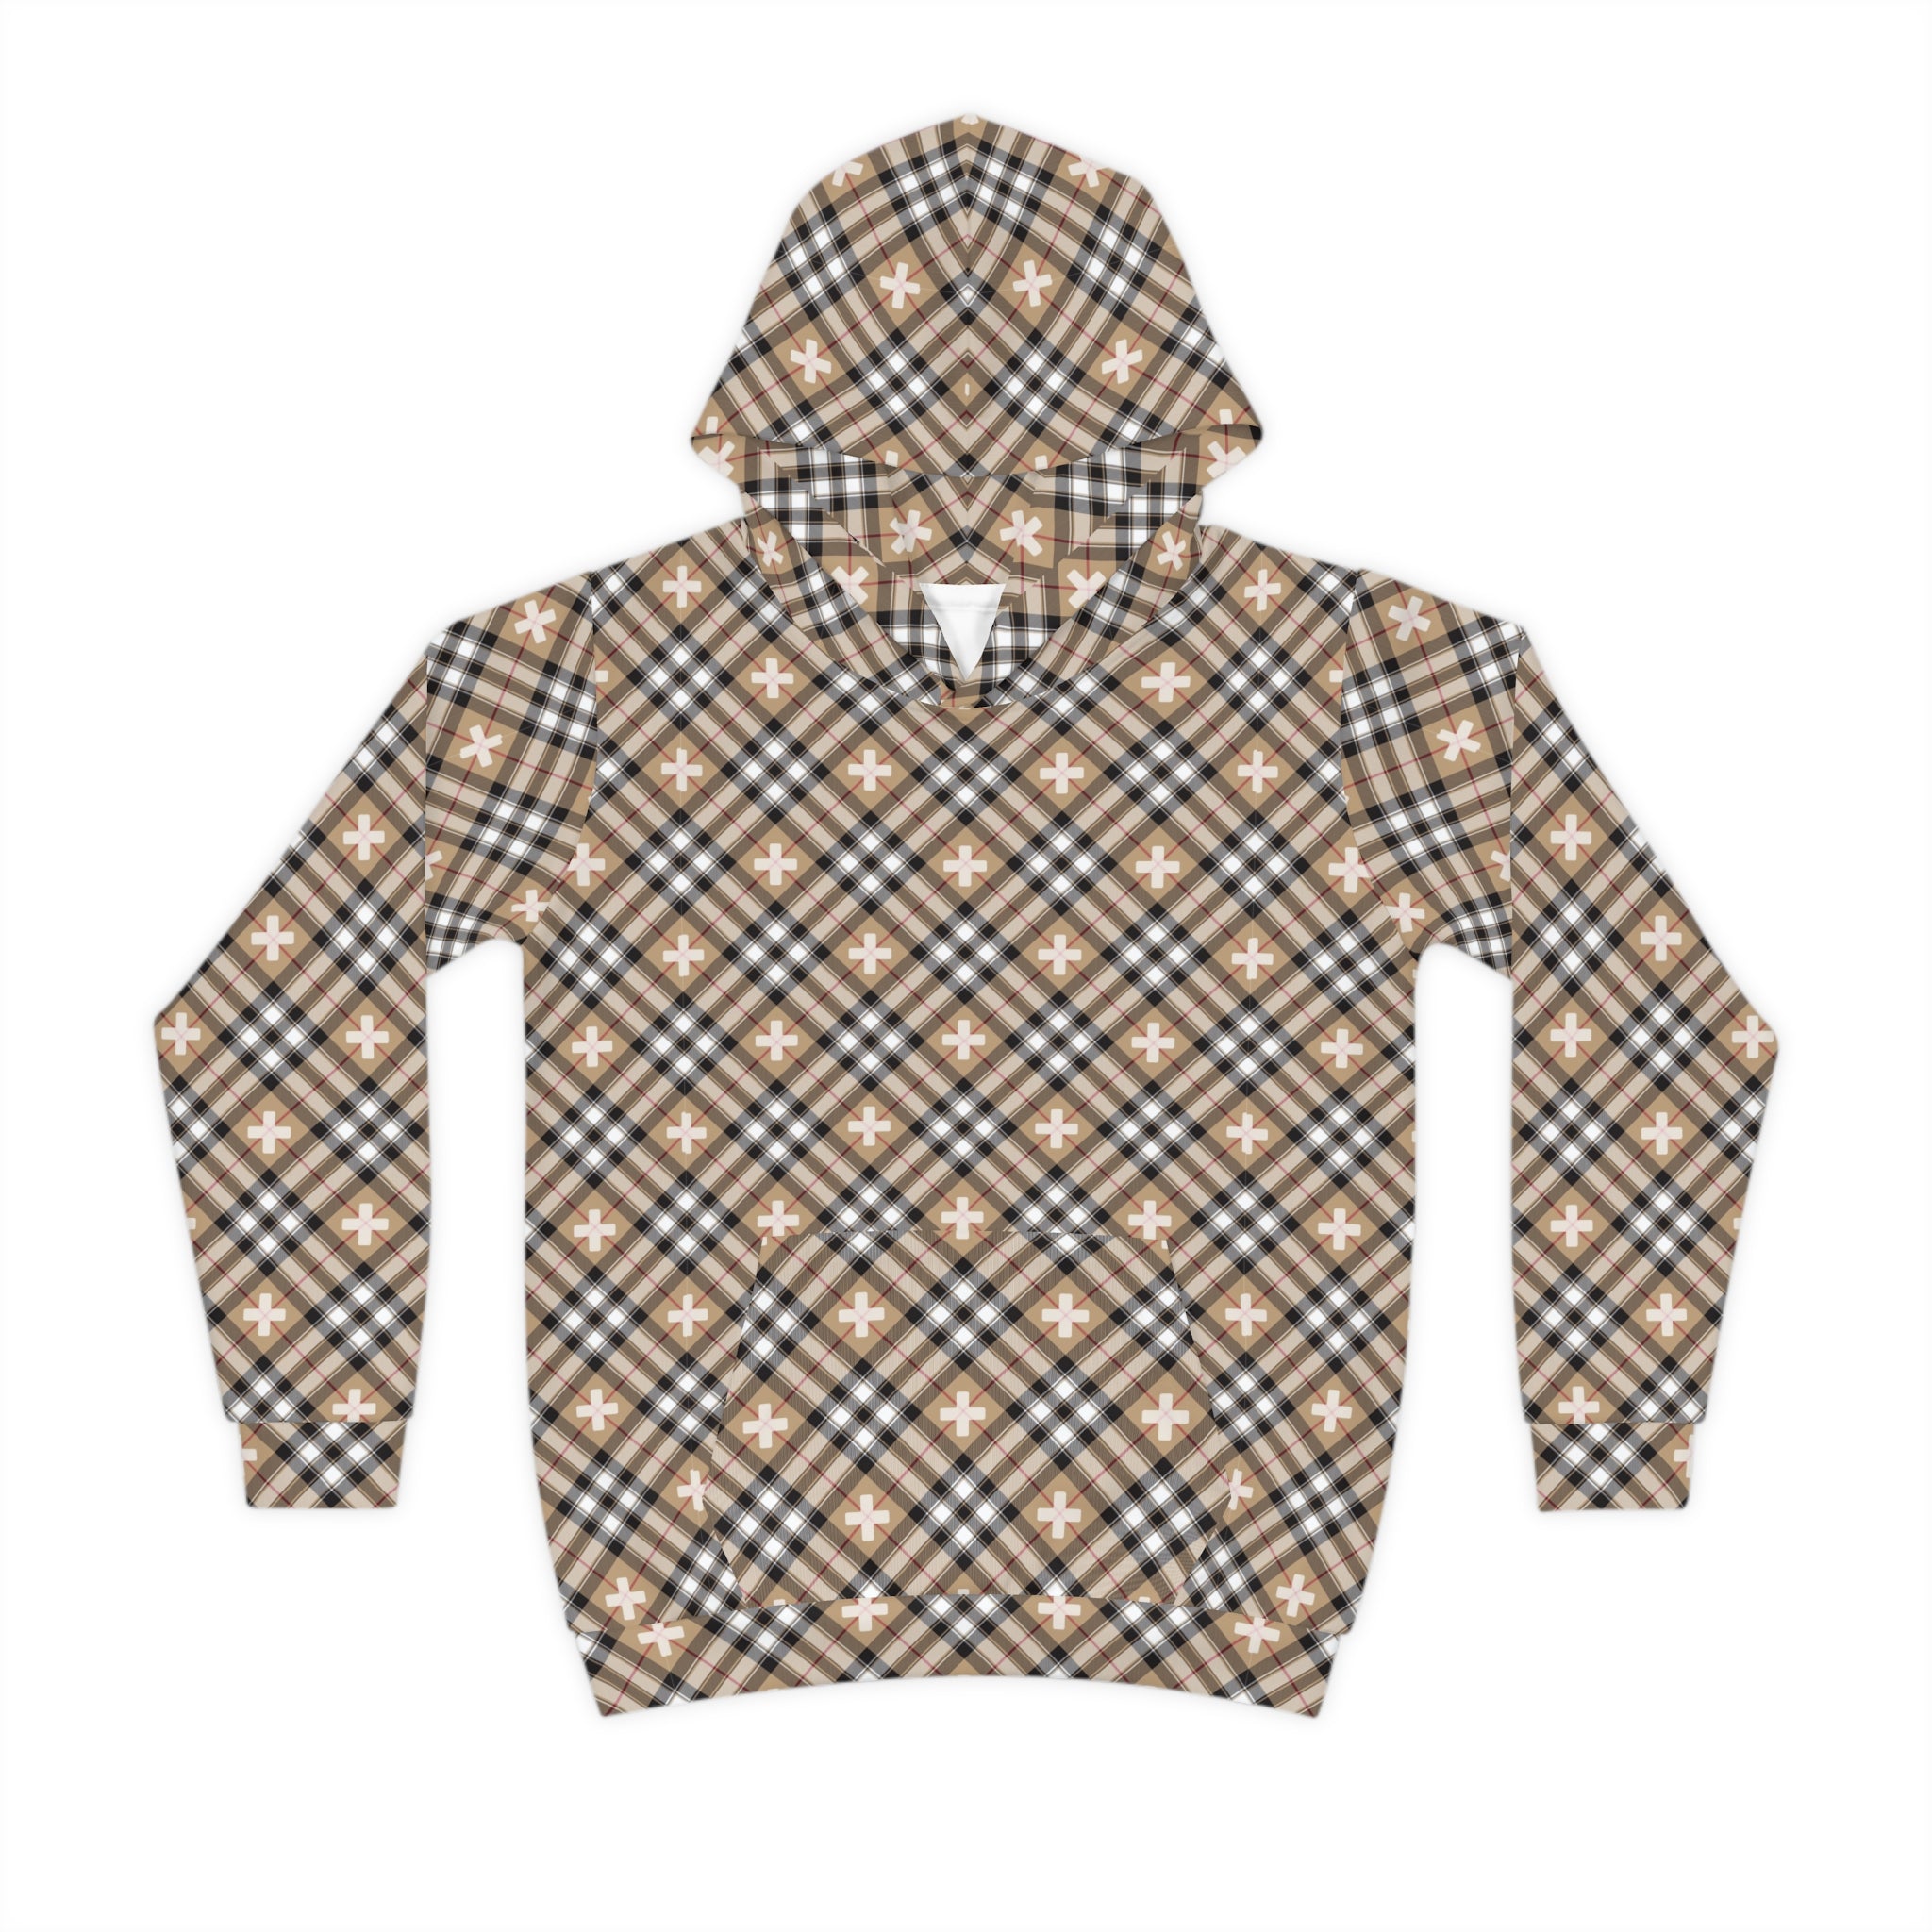  Beige Plaid Plus Sign Children's Hoodie, Pullover Sweater for Children, Kids Fashion Wear All Over Prints